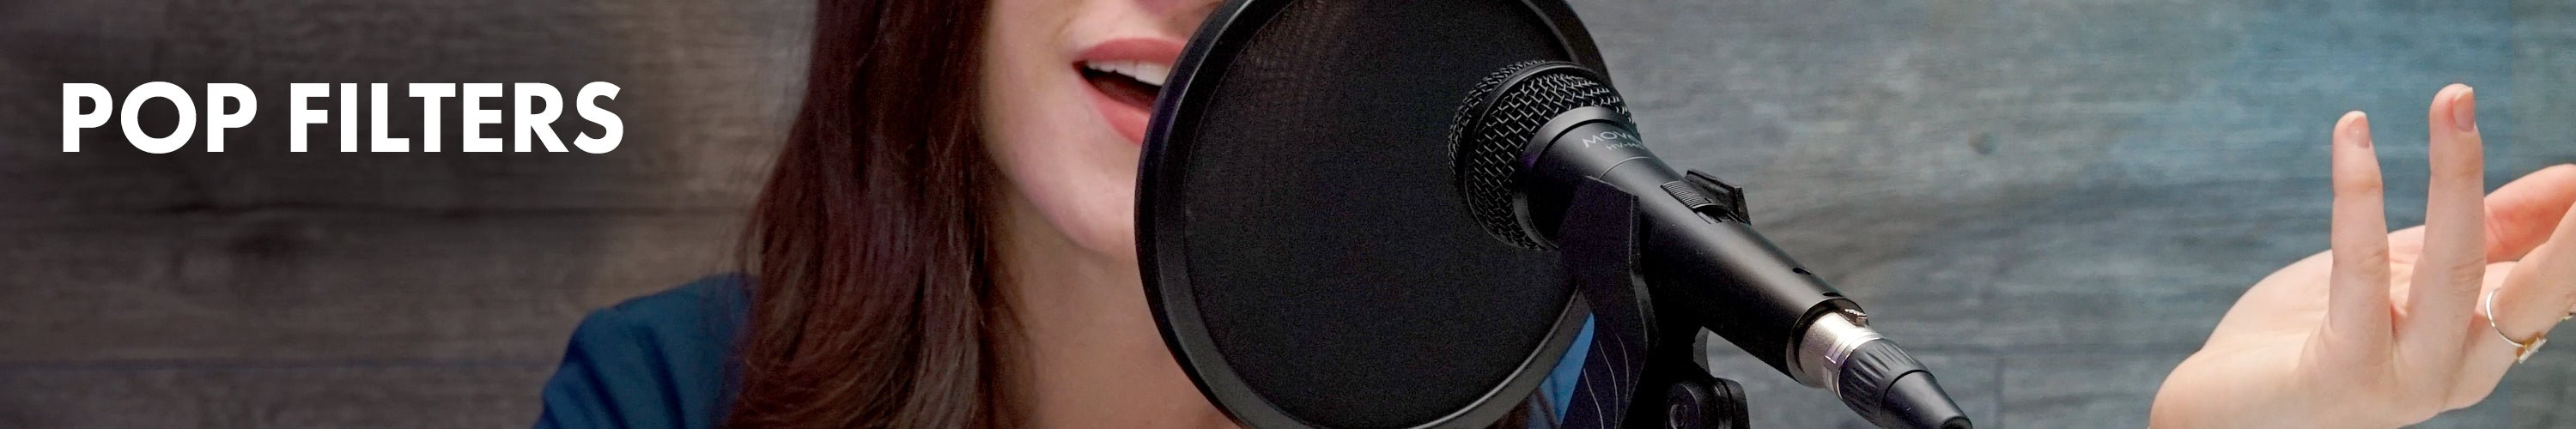 Mic Pop Filters - Movo